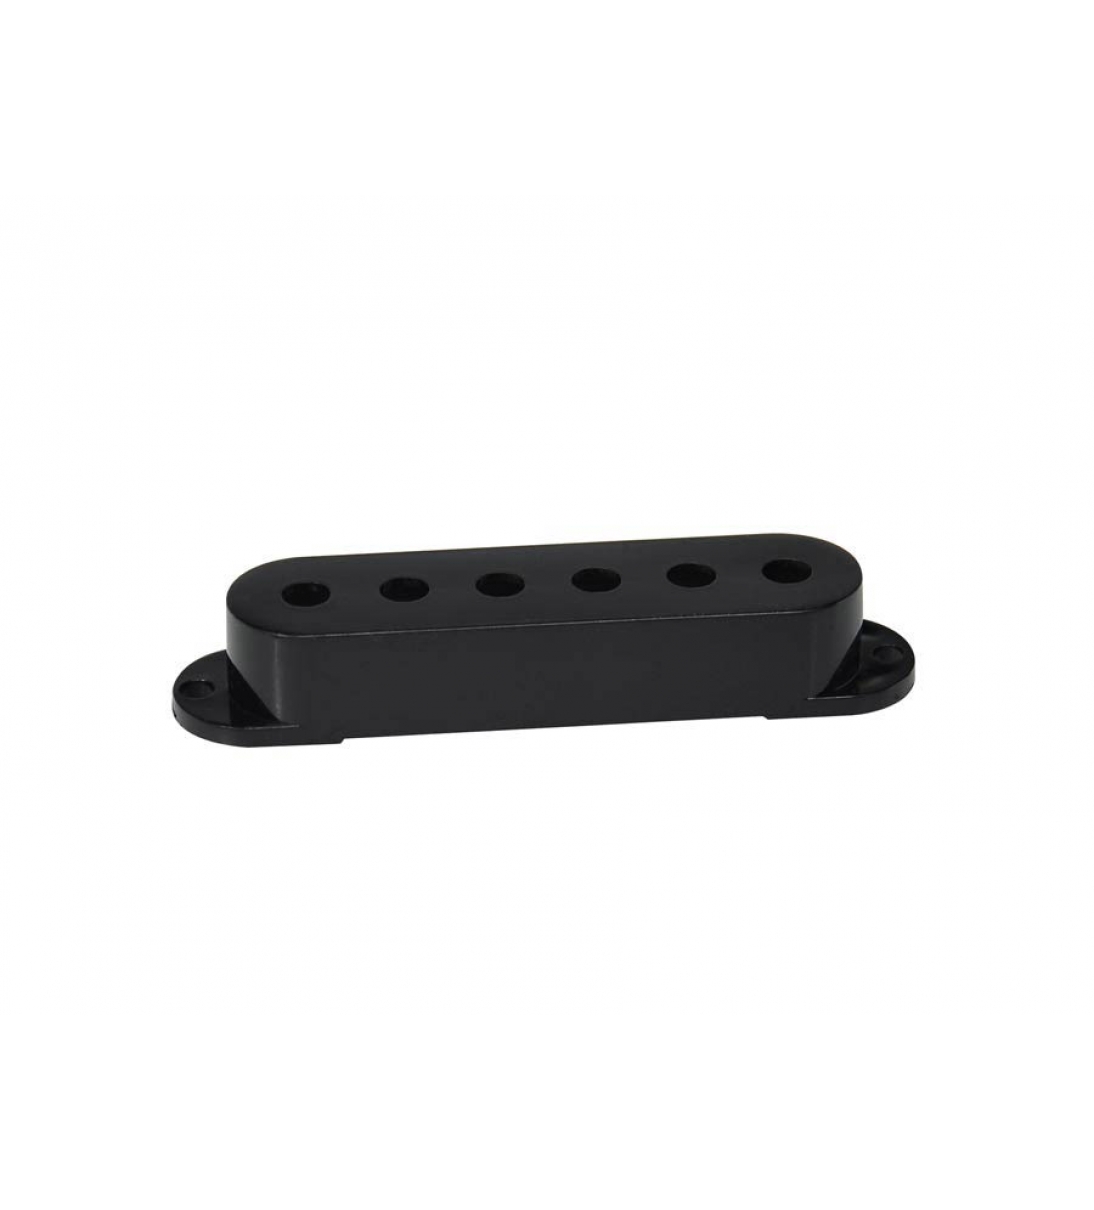 Pickup cover single coil 52mm spacing, 82,0-70,0x18,0mm, 3pcs